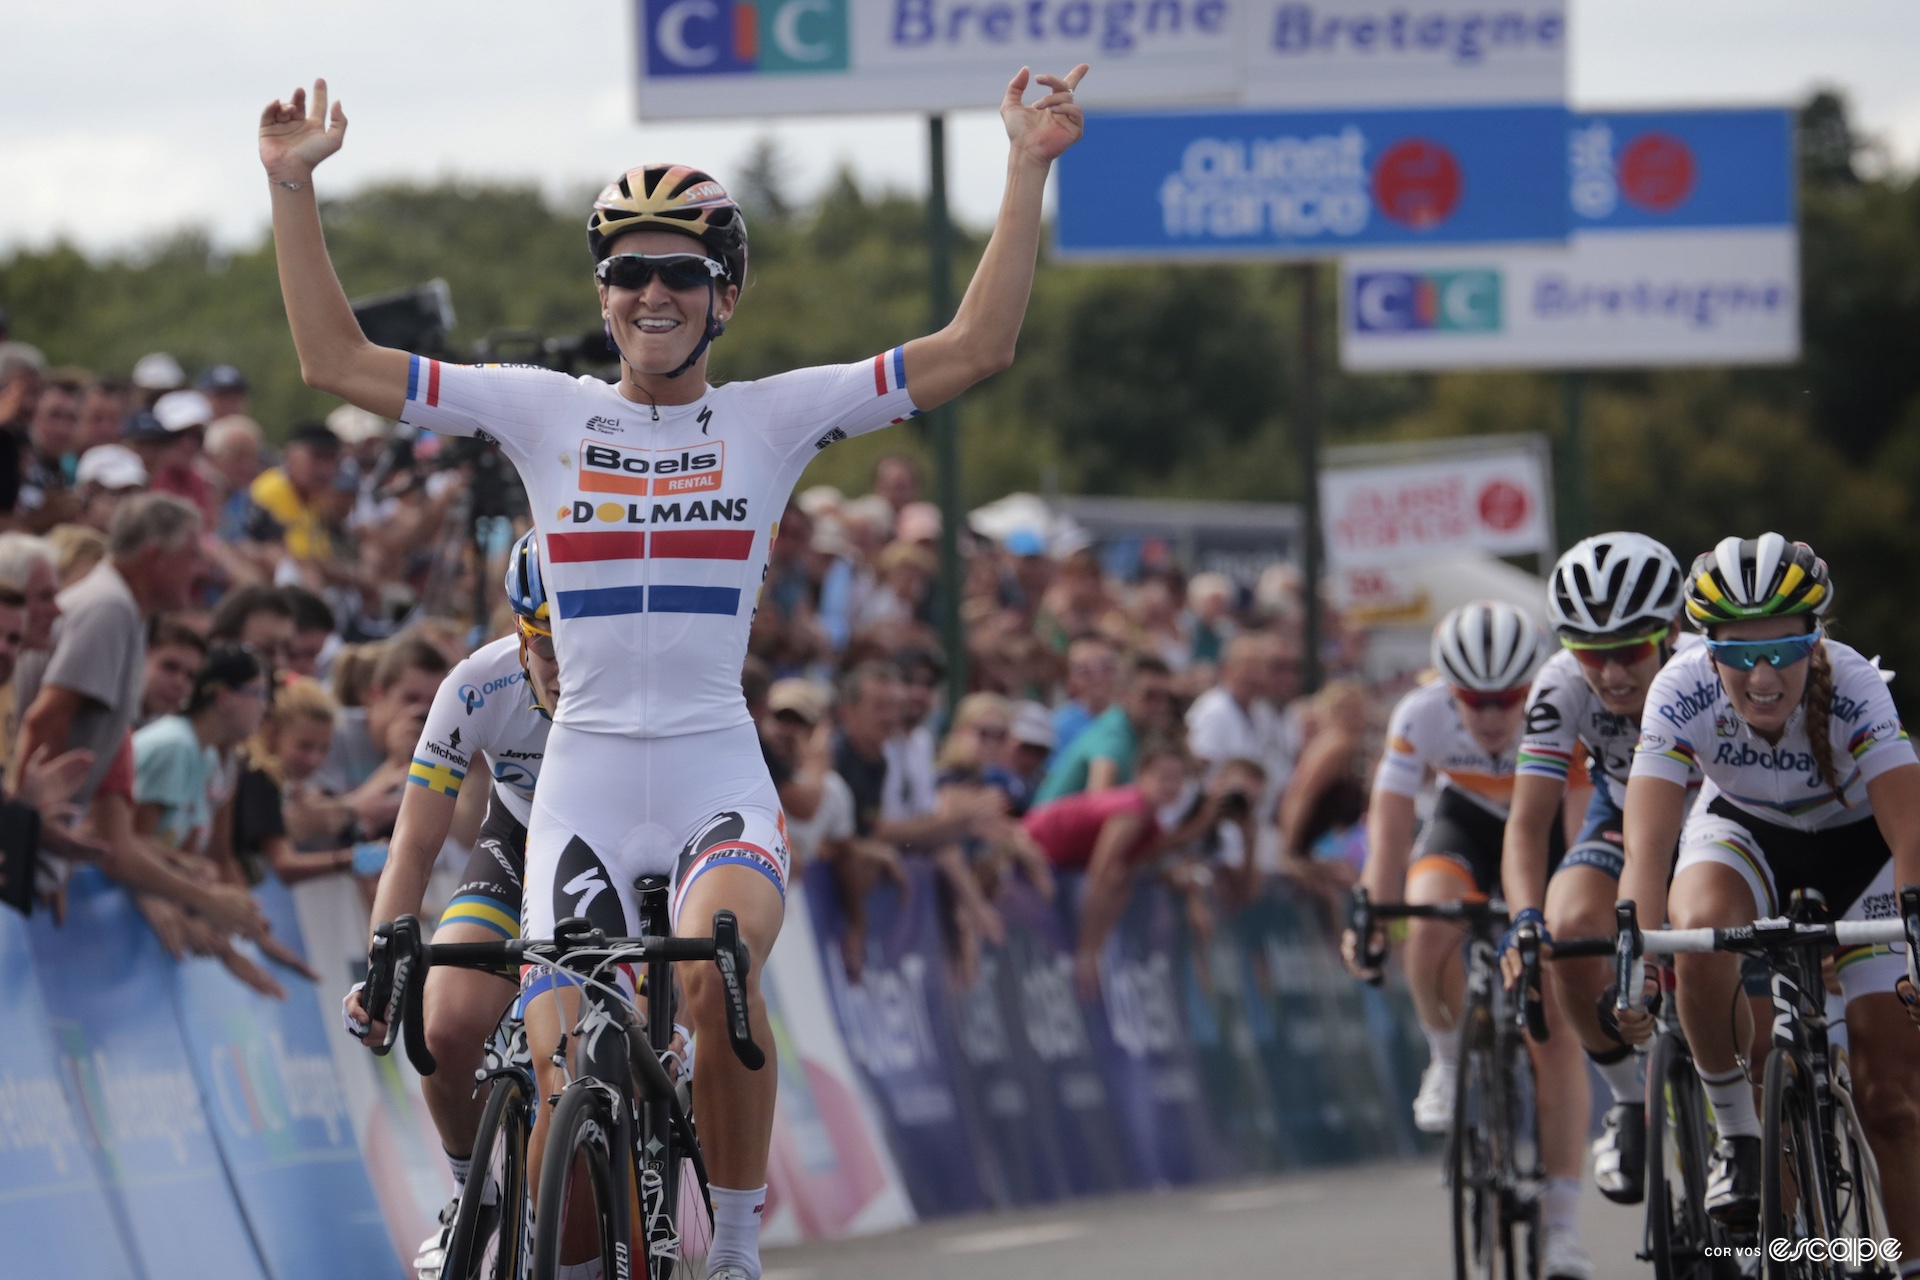 A cyclist in all white throws her arms in the air as she wins a bike race